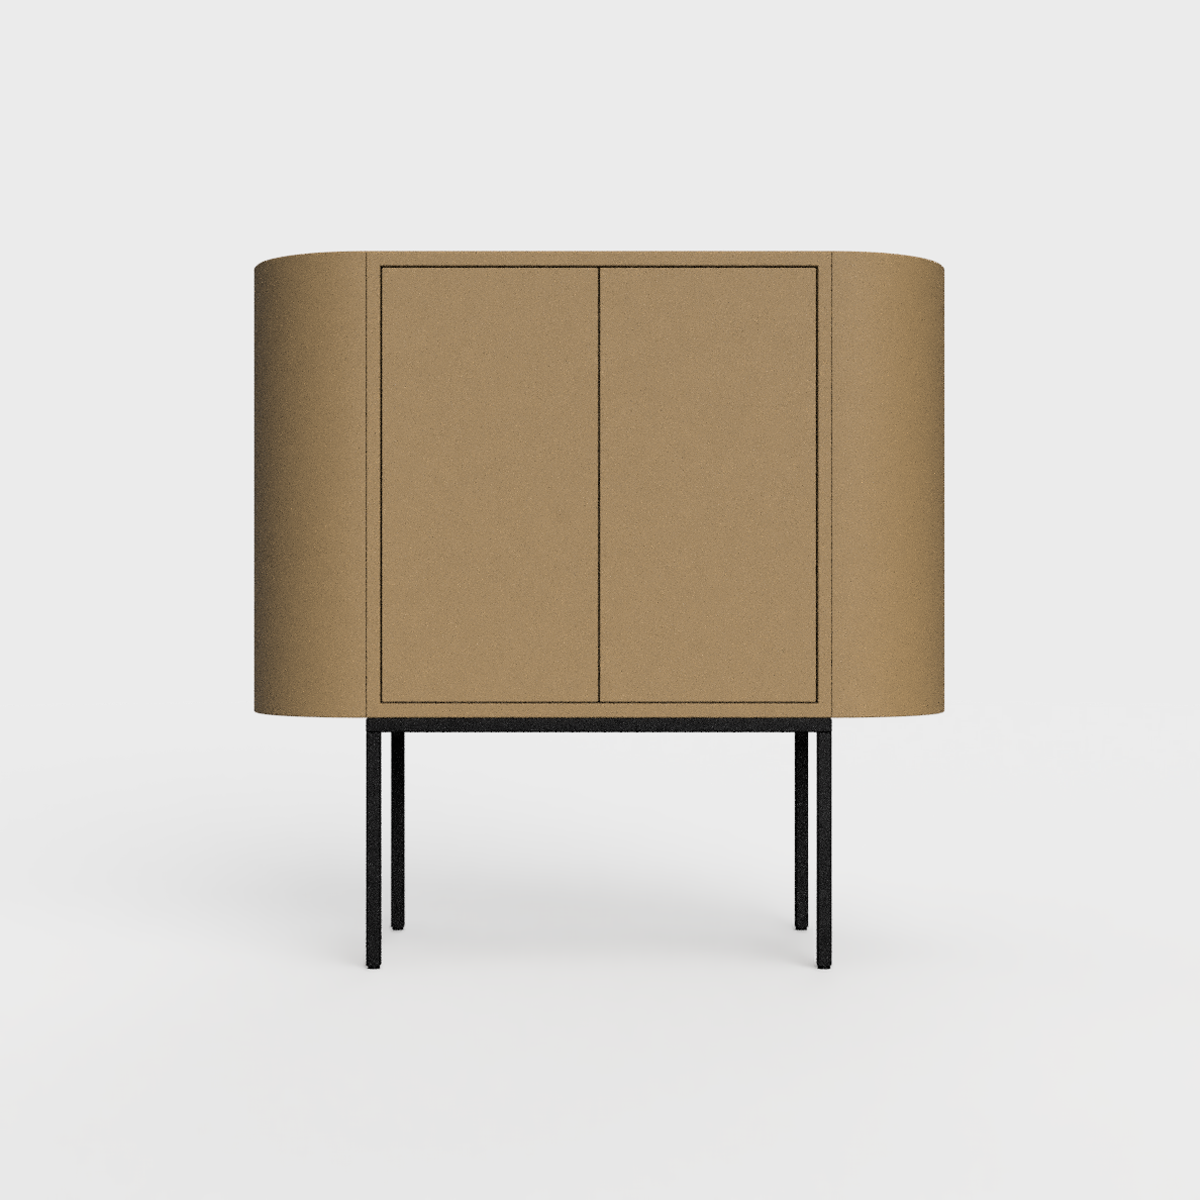 Siena 01 Sideboard in desert palm color, powder-coated steel, elegant and modern piece of furniture for your living room